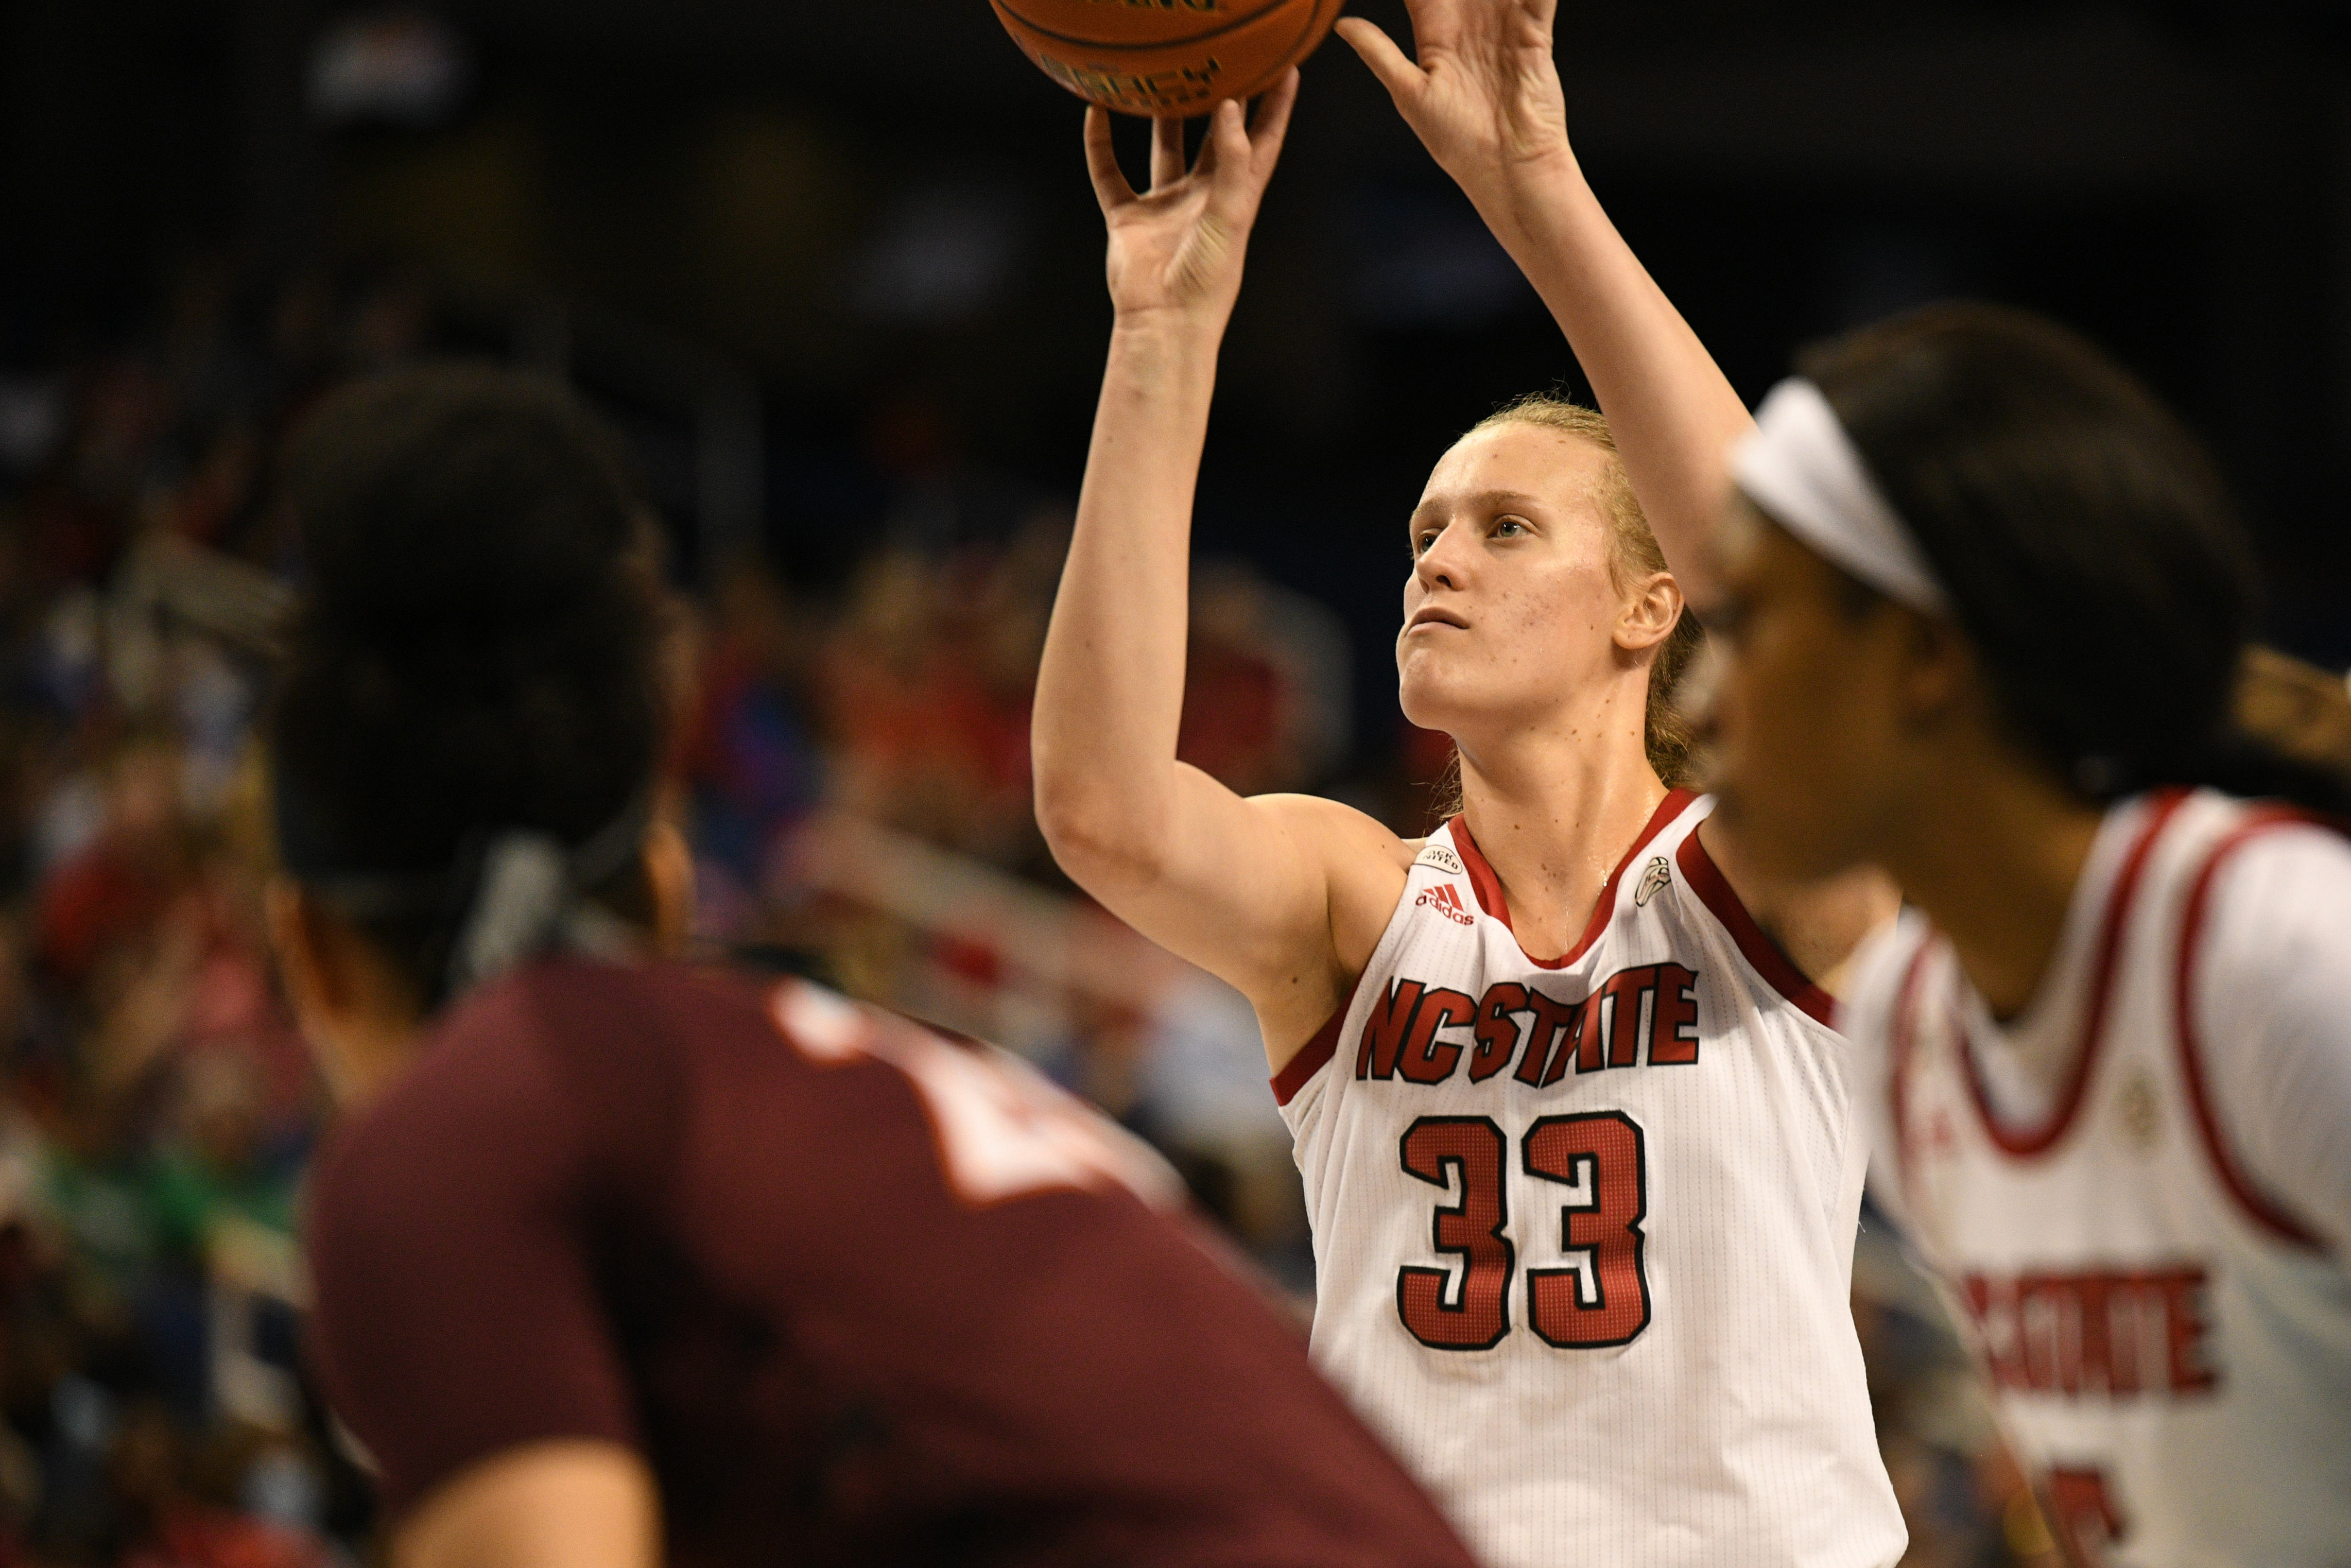 NC State Wolfpack center Elissa Cunane (33) shoots a free throw against Virginia Tech Hokies during the first quarter at Greensboro Coliseum Complex.